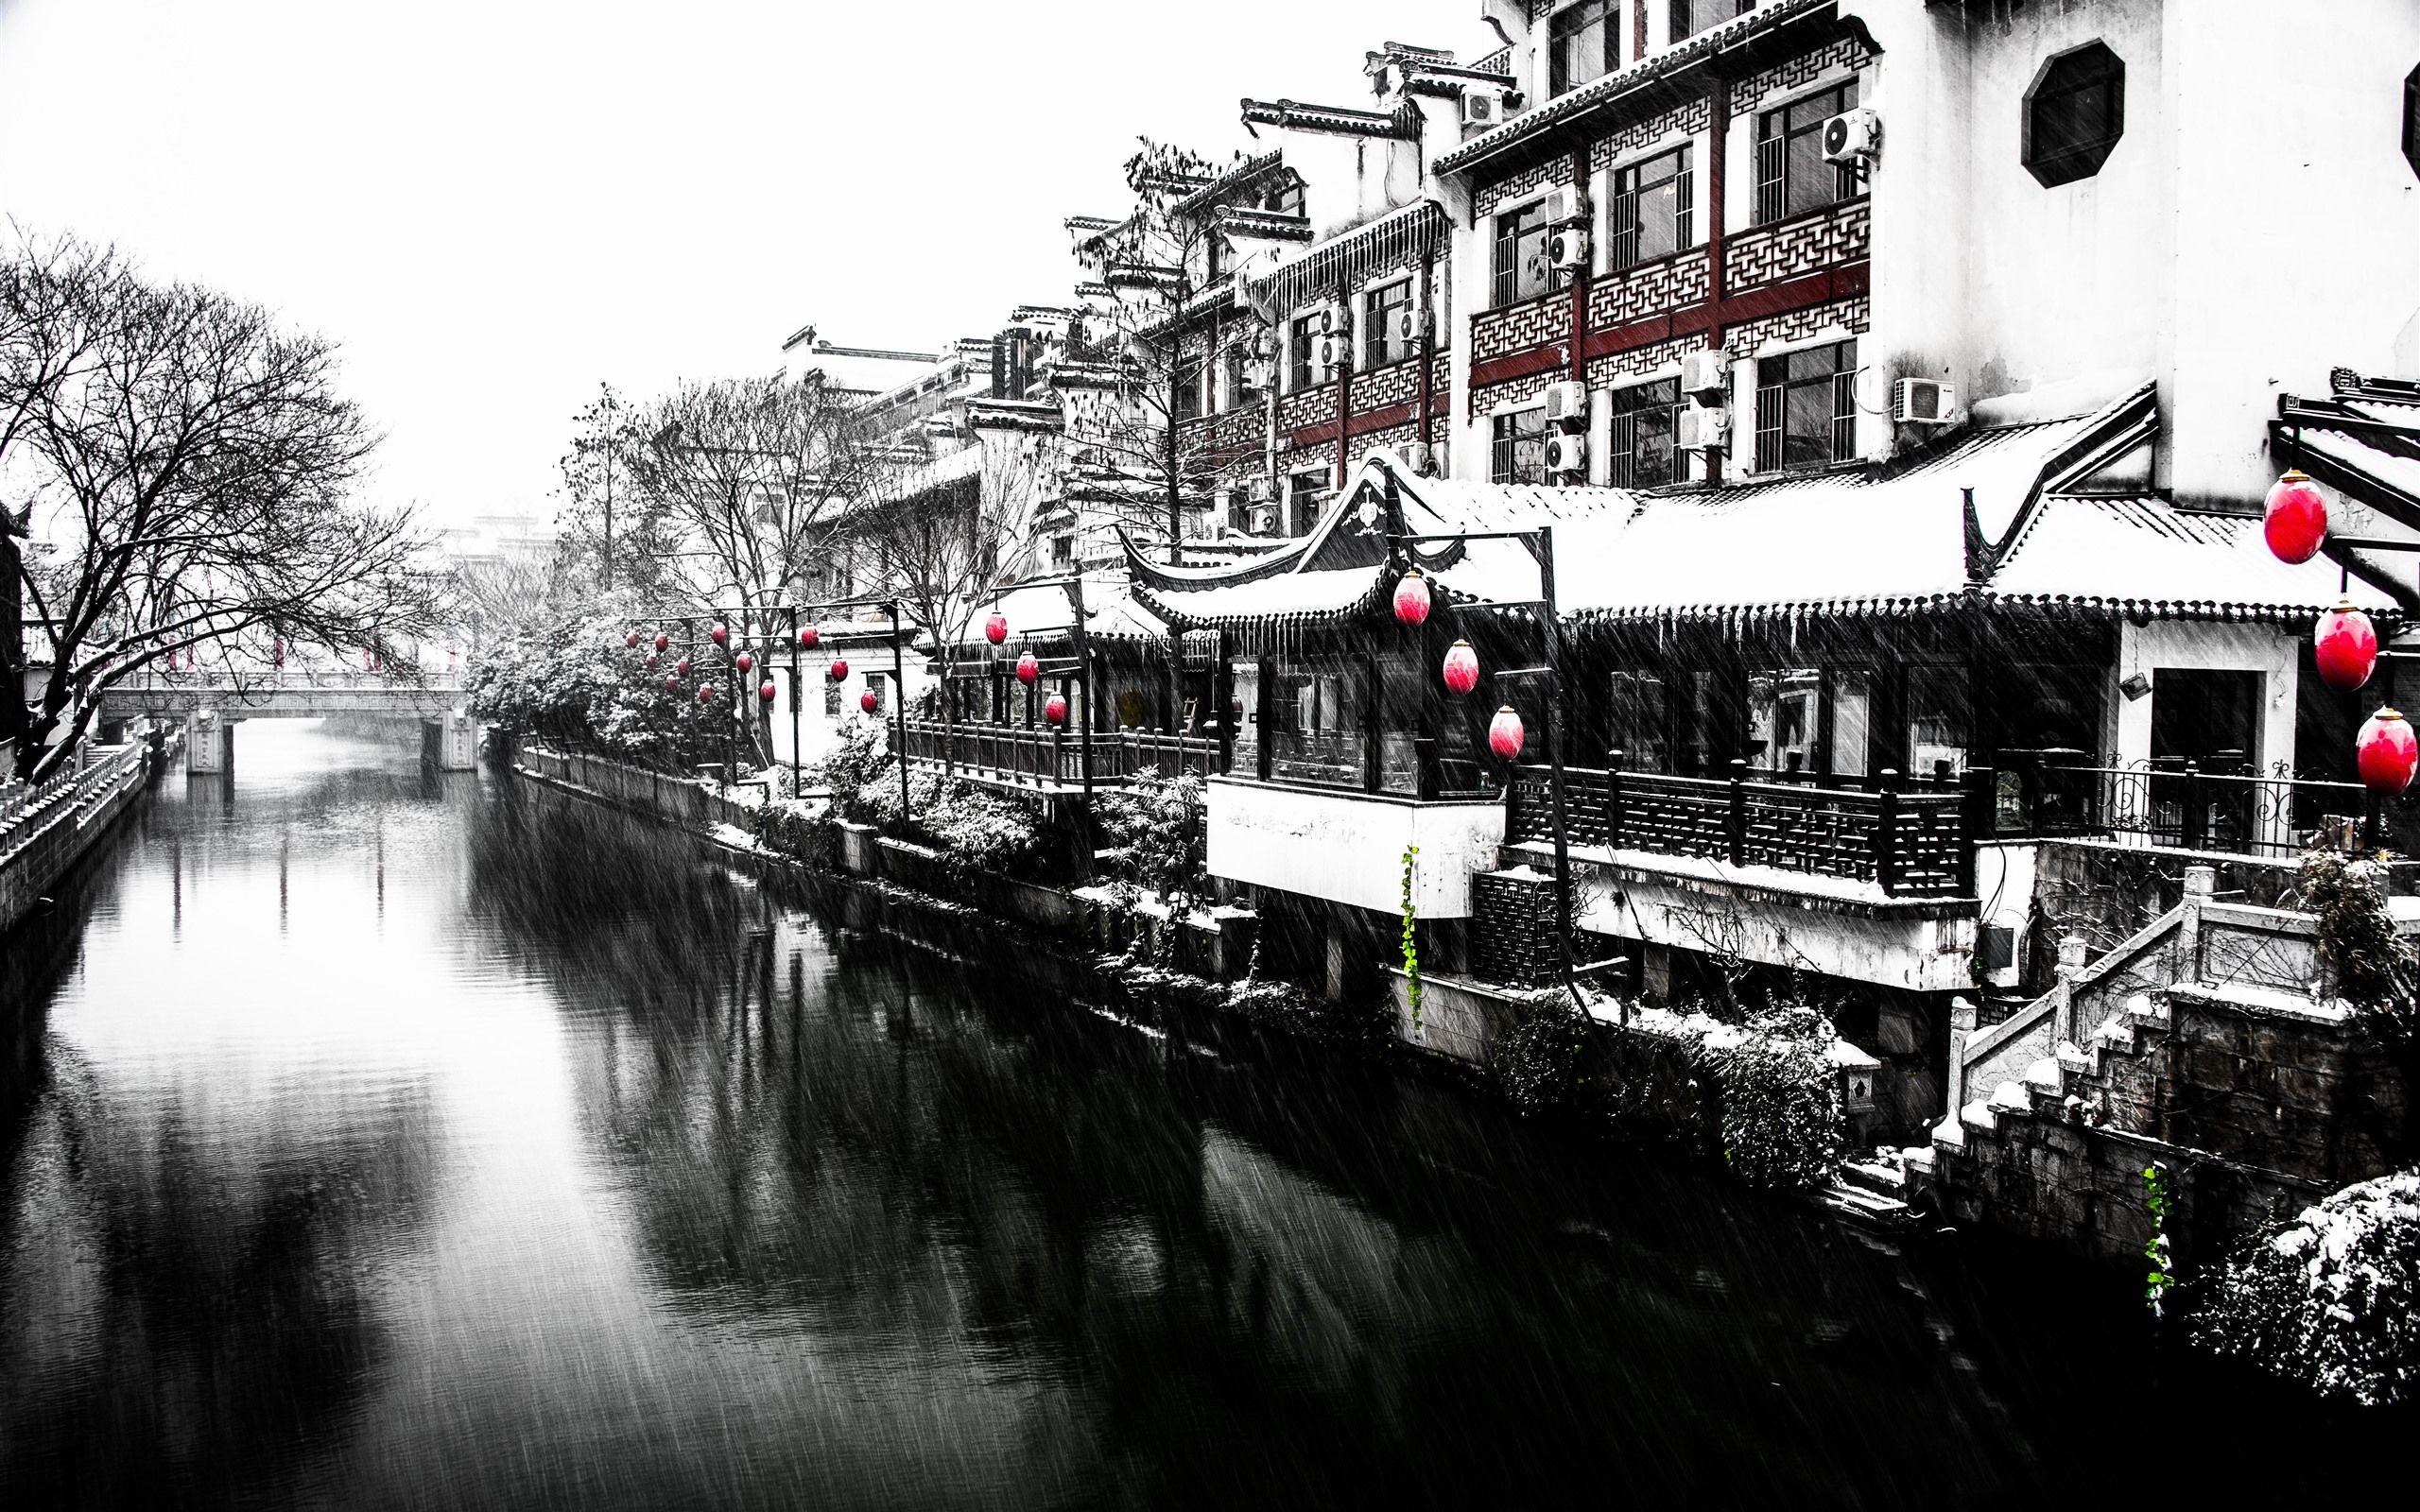 Wallpaper Nanjing, snowing, winter, river, house, retro style 5120x2880 UHD 5K Picture, Image